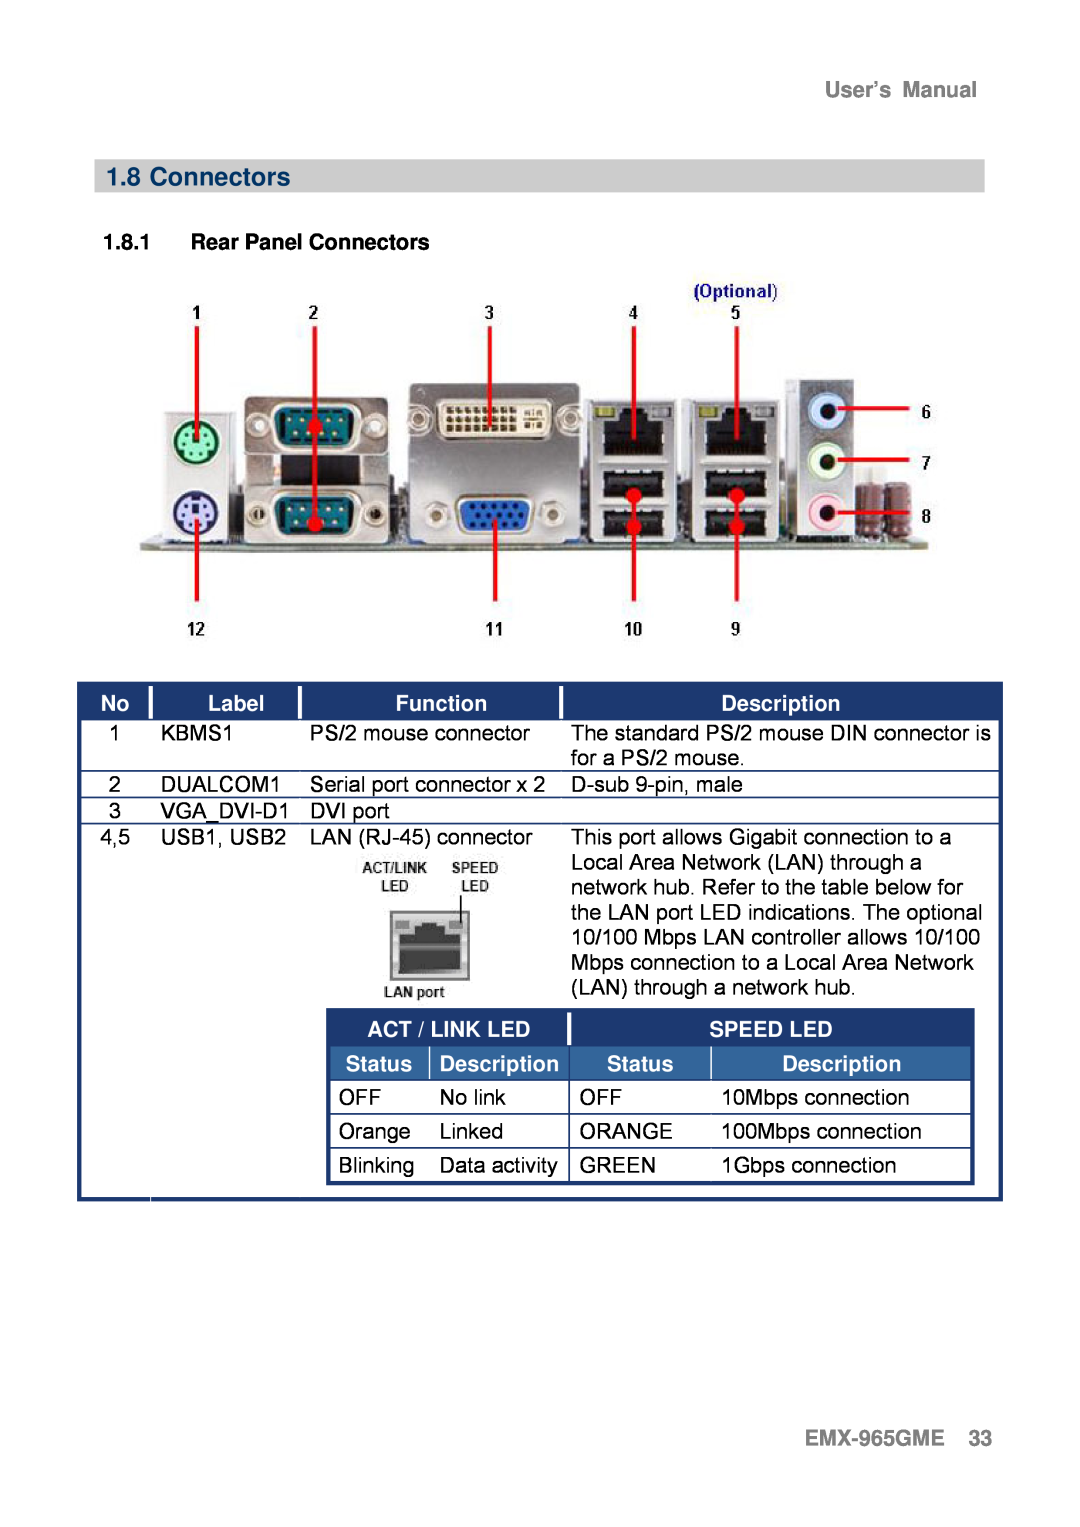 Intel 1.8.1Rear Panel Connectors, Description, Act / Link Led, Speed Led, Status, EMX-965GME33, User’s Manual 